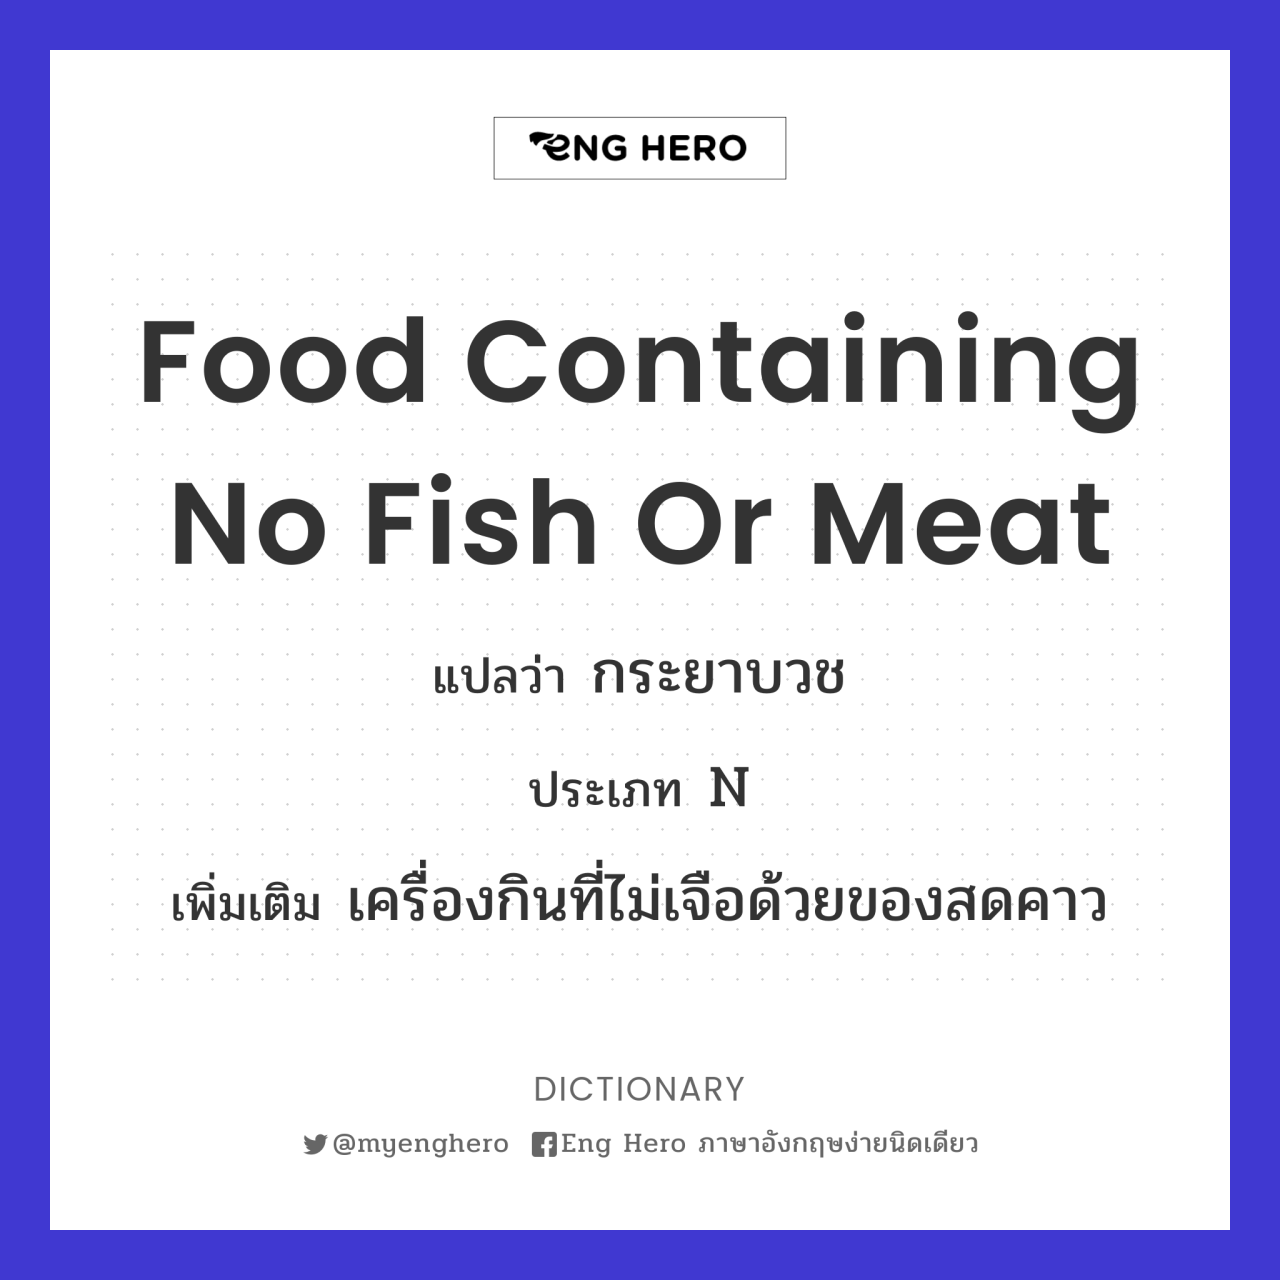 No meat just fish